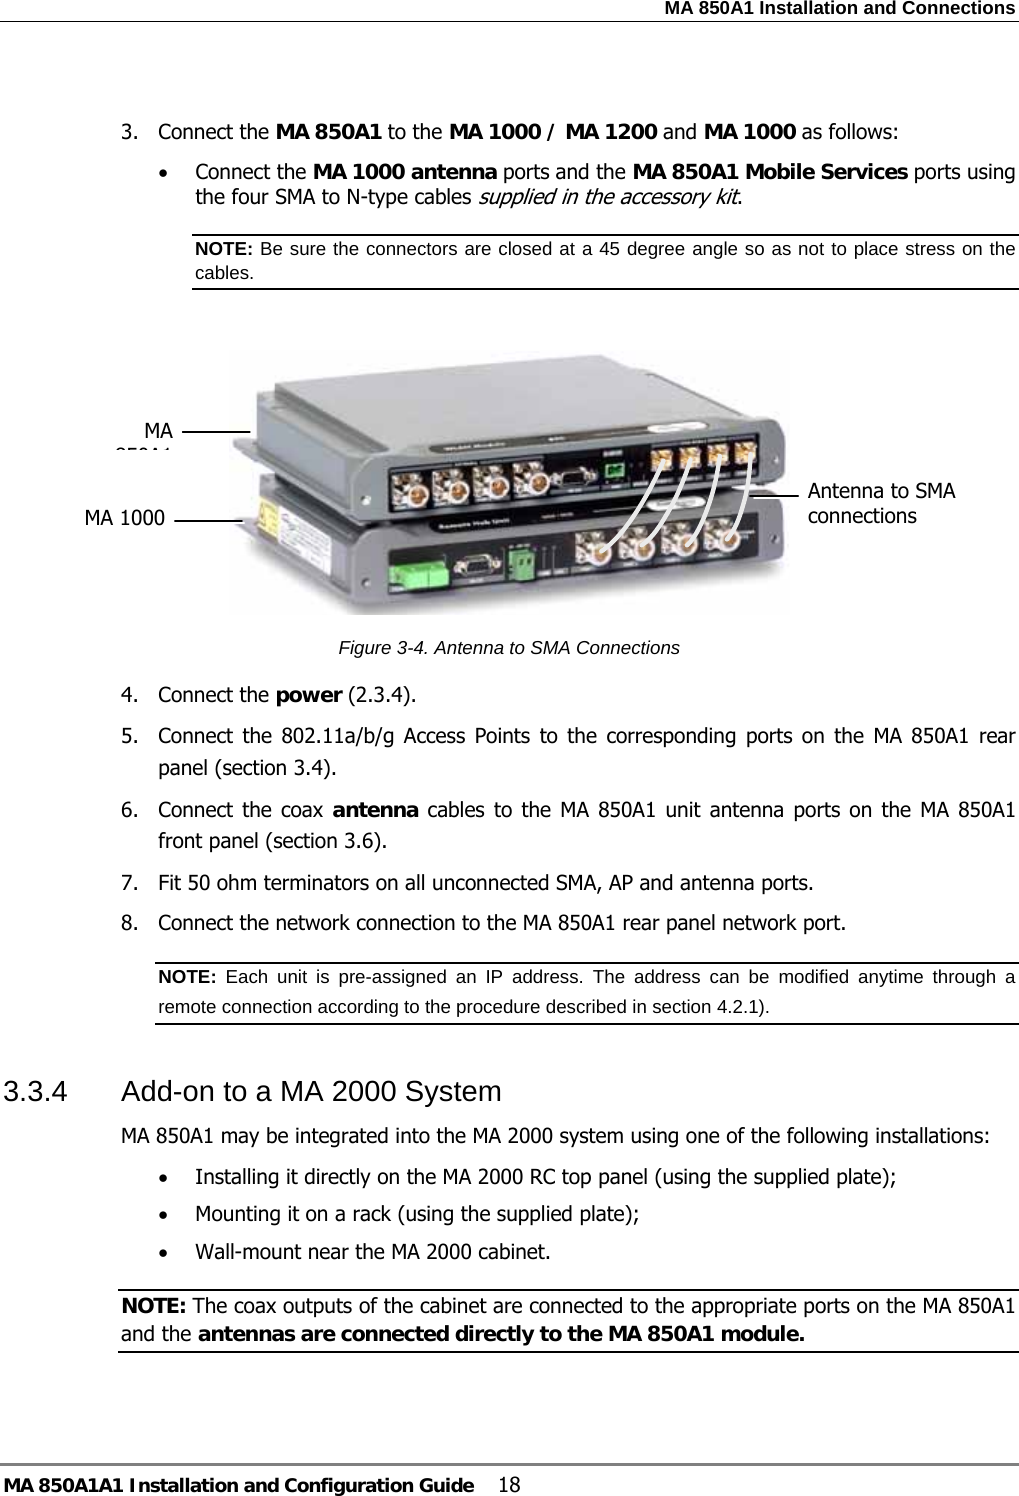 MA 850A1 Installation and Connections MA 850A1A1 Installation and Configuration Guide  18  3. Connect the MA 850A1 to the MA 1000 / MA 1200 and MA 1000 as follows: • Connect the MA 1000 antenna ports and the MA 850A1 Mobile Services ports using the four SMA to N-type cables supplied in the accessory kit.  NOTE: Be sure the connectors are closed at a 45 degree angle so as not to place stress on the cables.   Figure  3-4. Antenna to SMA Connections 4. Connect the power ( 2.3.4). 5.  Connect the 802.11a/b/g Access Points to the corresponding ports on the MA 850A1 rear panel (section  3.4). 6.  Connect the coax antenna cables to the MA 850A1 unit antenna ports on the MA 850A1 front panel (section  3.6). 7.  Fit 50 ohm terminators on all unconnected SMA, AP and antenna ports. 8.  Connect the network connection to the MA 850A1 rear panel network port. NOTE:  Each unit is pre-assigned an IP address. The address can be modified anytime through a remote connection according to the procedure described in section  4.2.1).   3.3.4  Add-on to a MA 2000 System  MA 850A1 may be integrated into the MA 2000 system using one of the following installations: • Installing it directly on the MA 2000 RC top panel (using the supplied plate); • Mounting it on a rack (using the supplied plate); • Wall-mount near the MA 2000 cabinet.  NOTE: The coax outputs of the cabinet are connected to the appropriate ports on the MA 850A1 and the antennas are connected directly to the MA 850A1 module.  Antenna to SMA connections MA 850A1MA 1000 